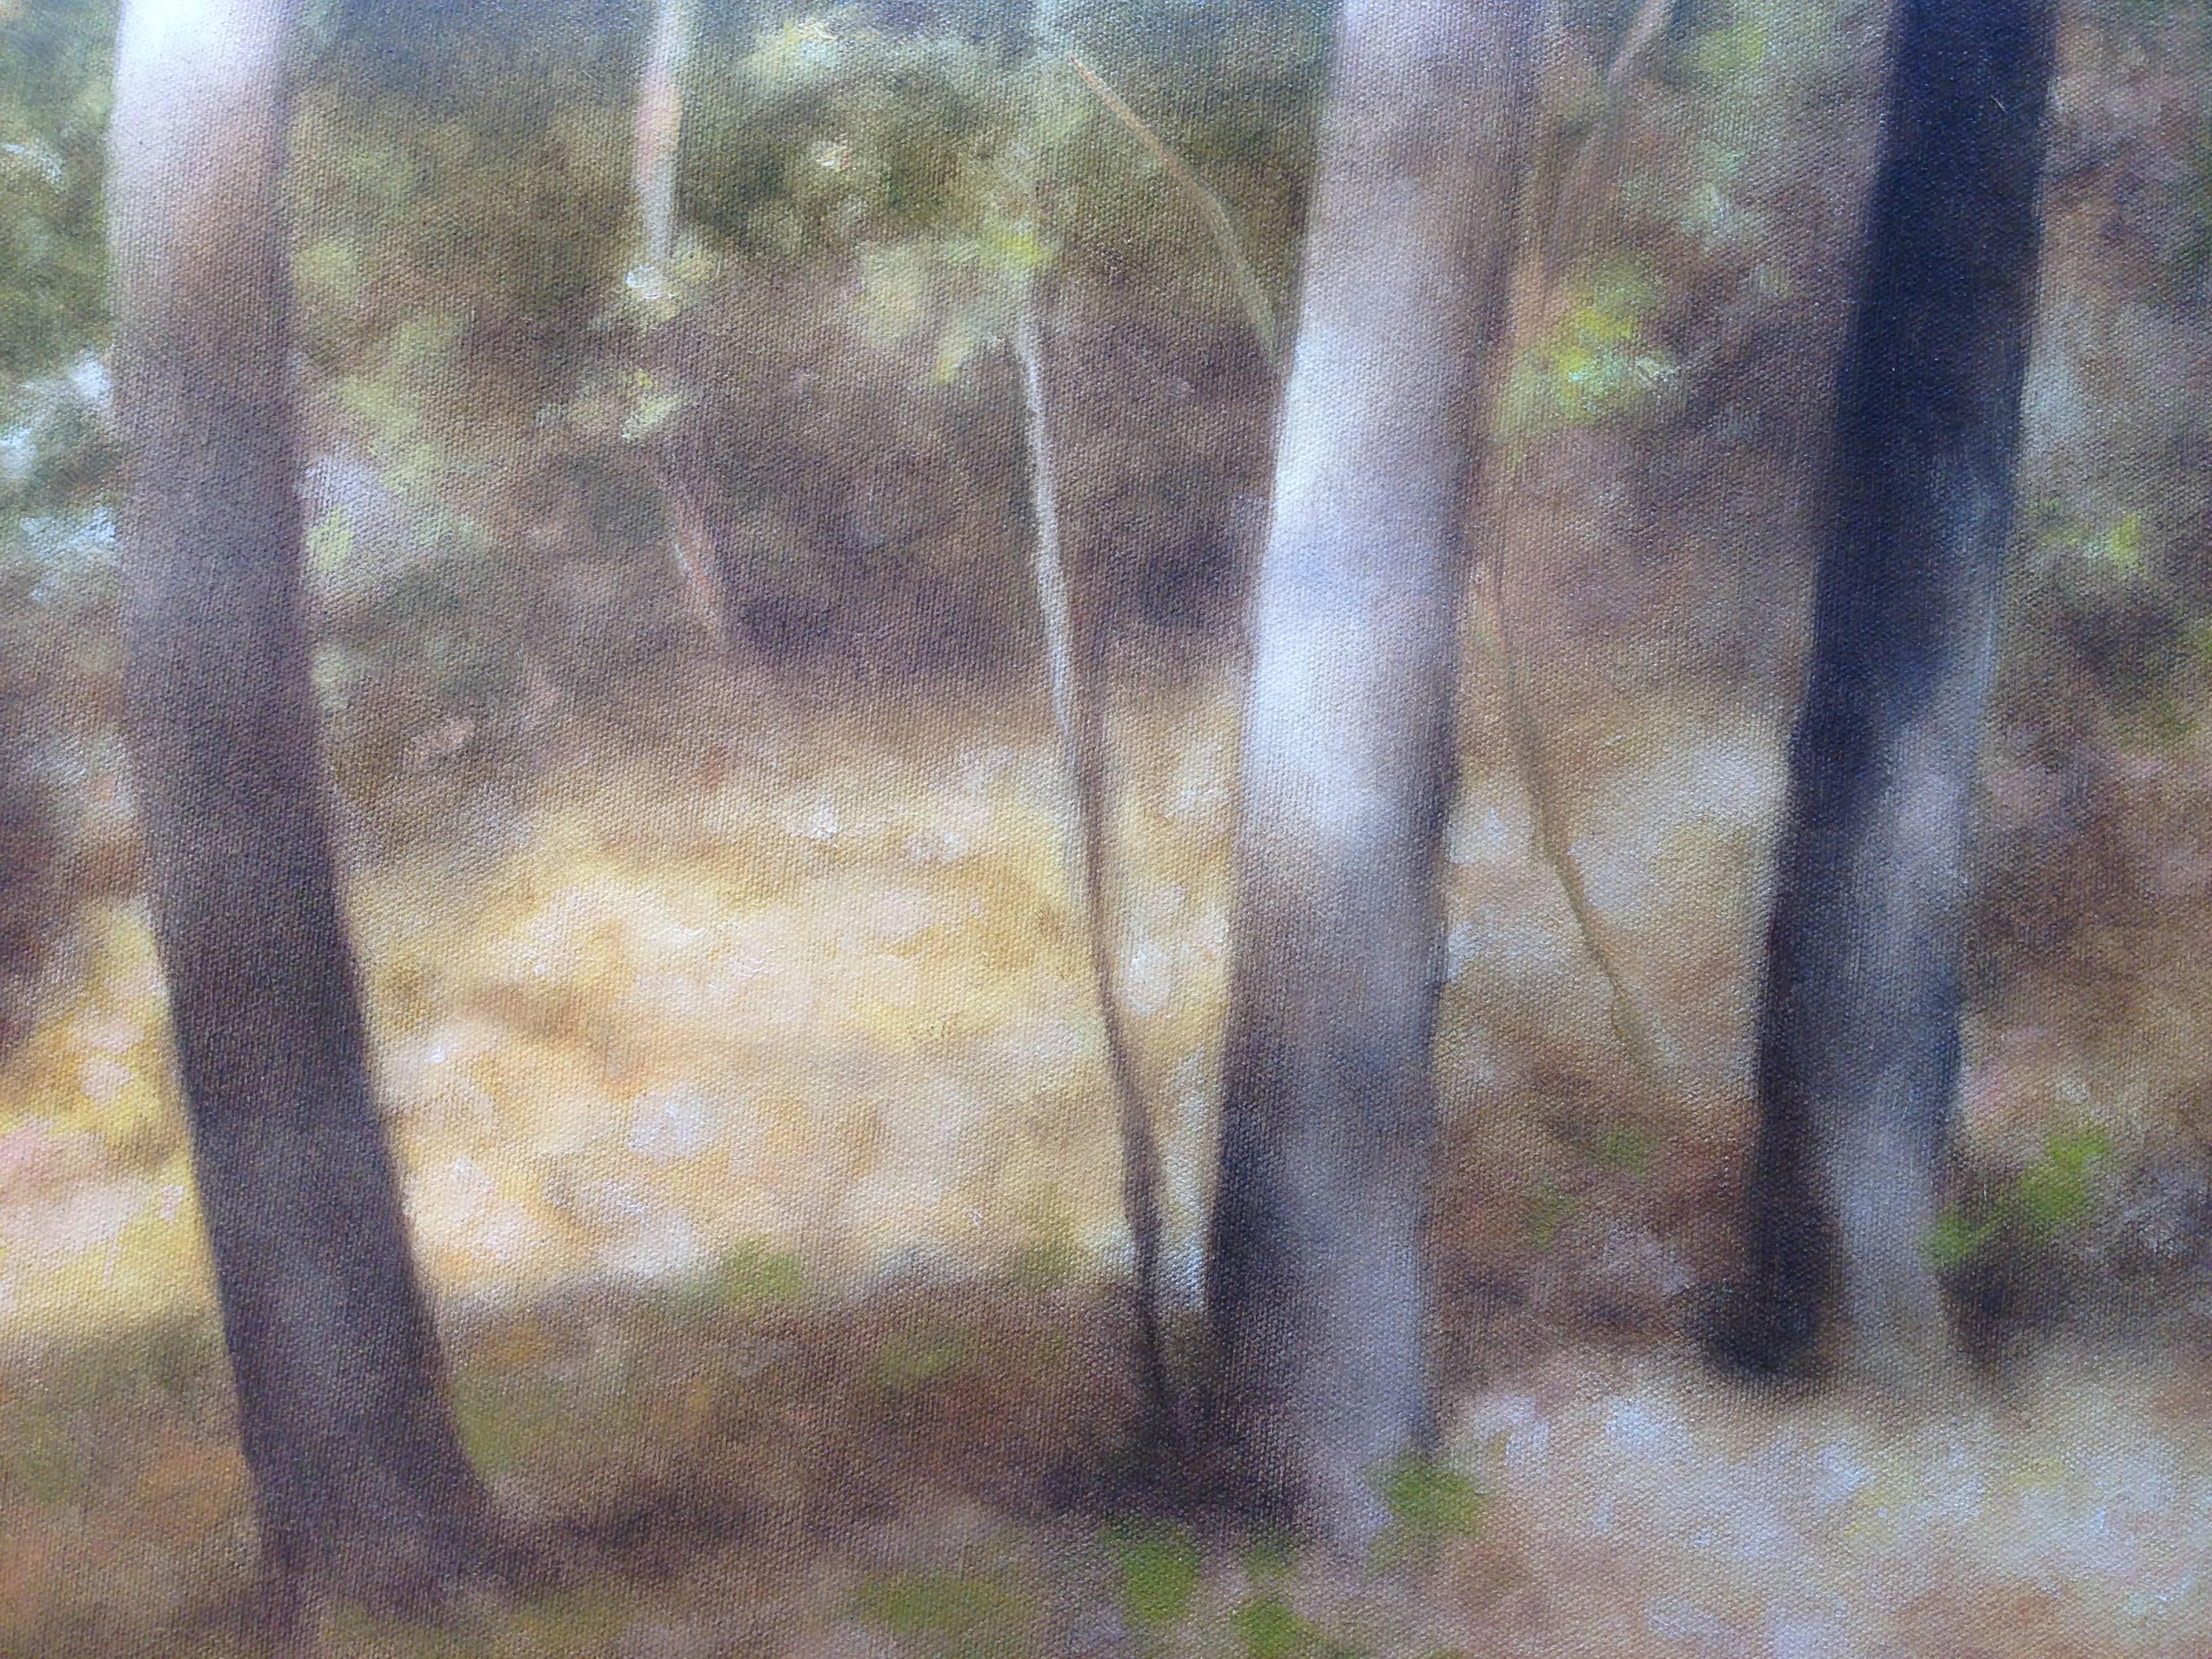 Rest for a moment beside these peaceful trees, at the edge of the wood, with the lake beyond. Folchi uses soft greens, grey, and gold to paint the serene, idyllic vignette. 
John Folchi was born in the Bronx and studied at the Art Students League in